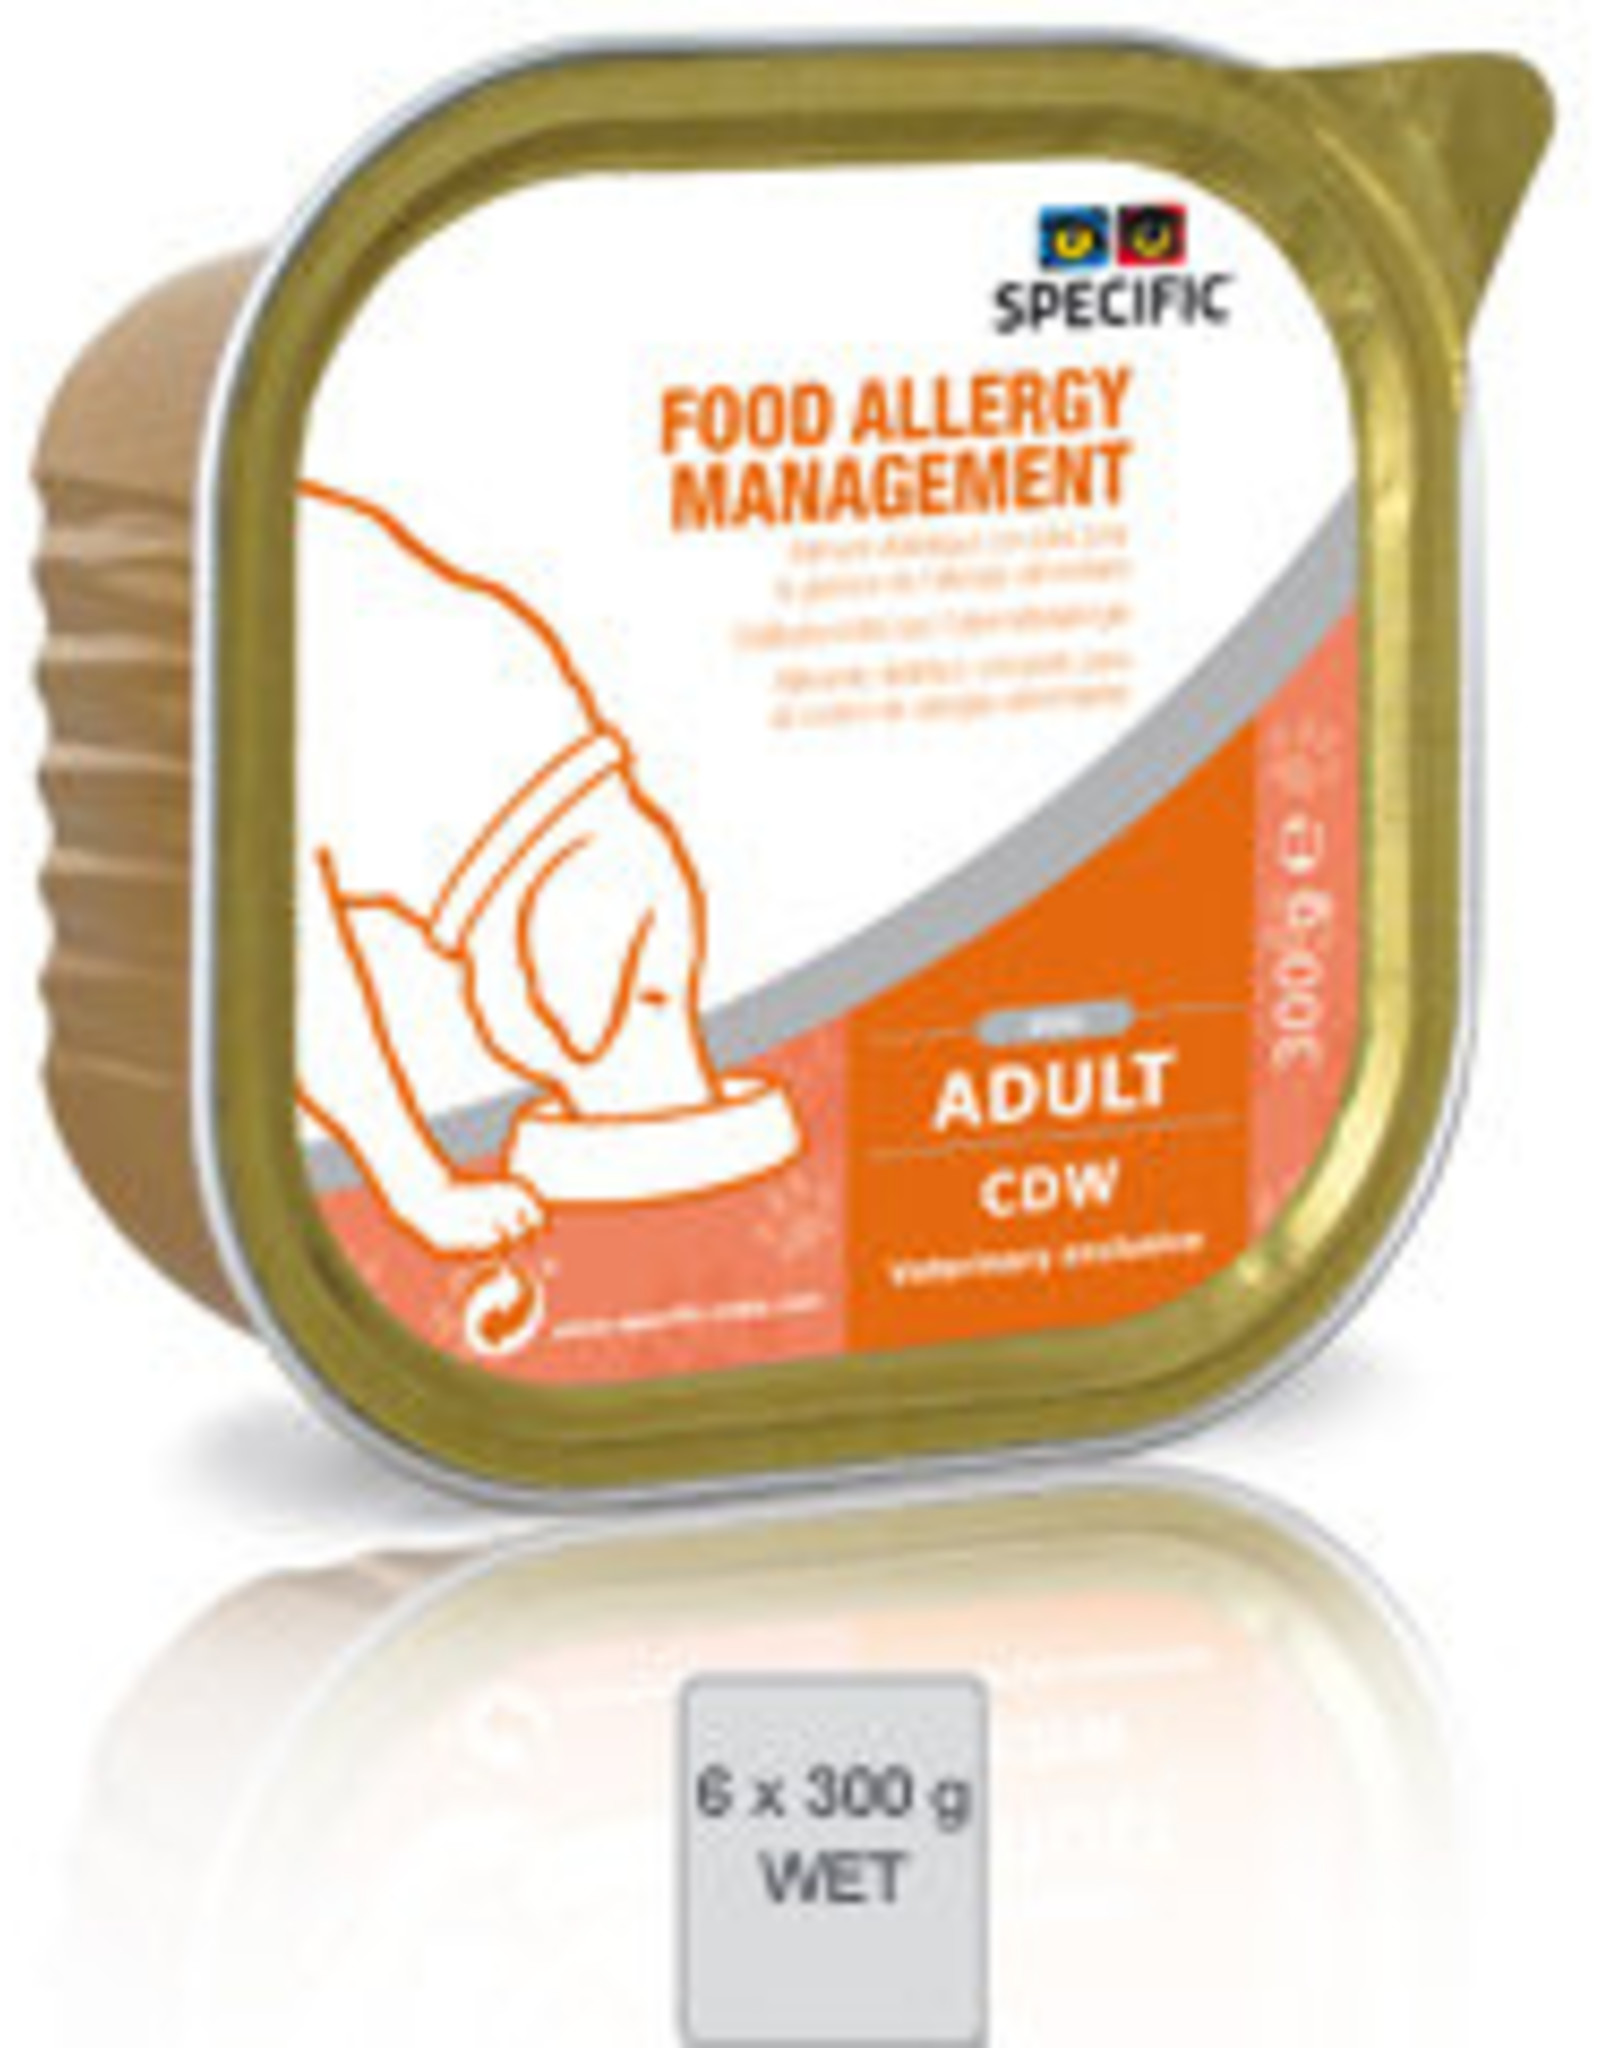 Specific Specific Cdw Food Allergy 6x300gr